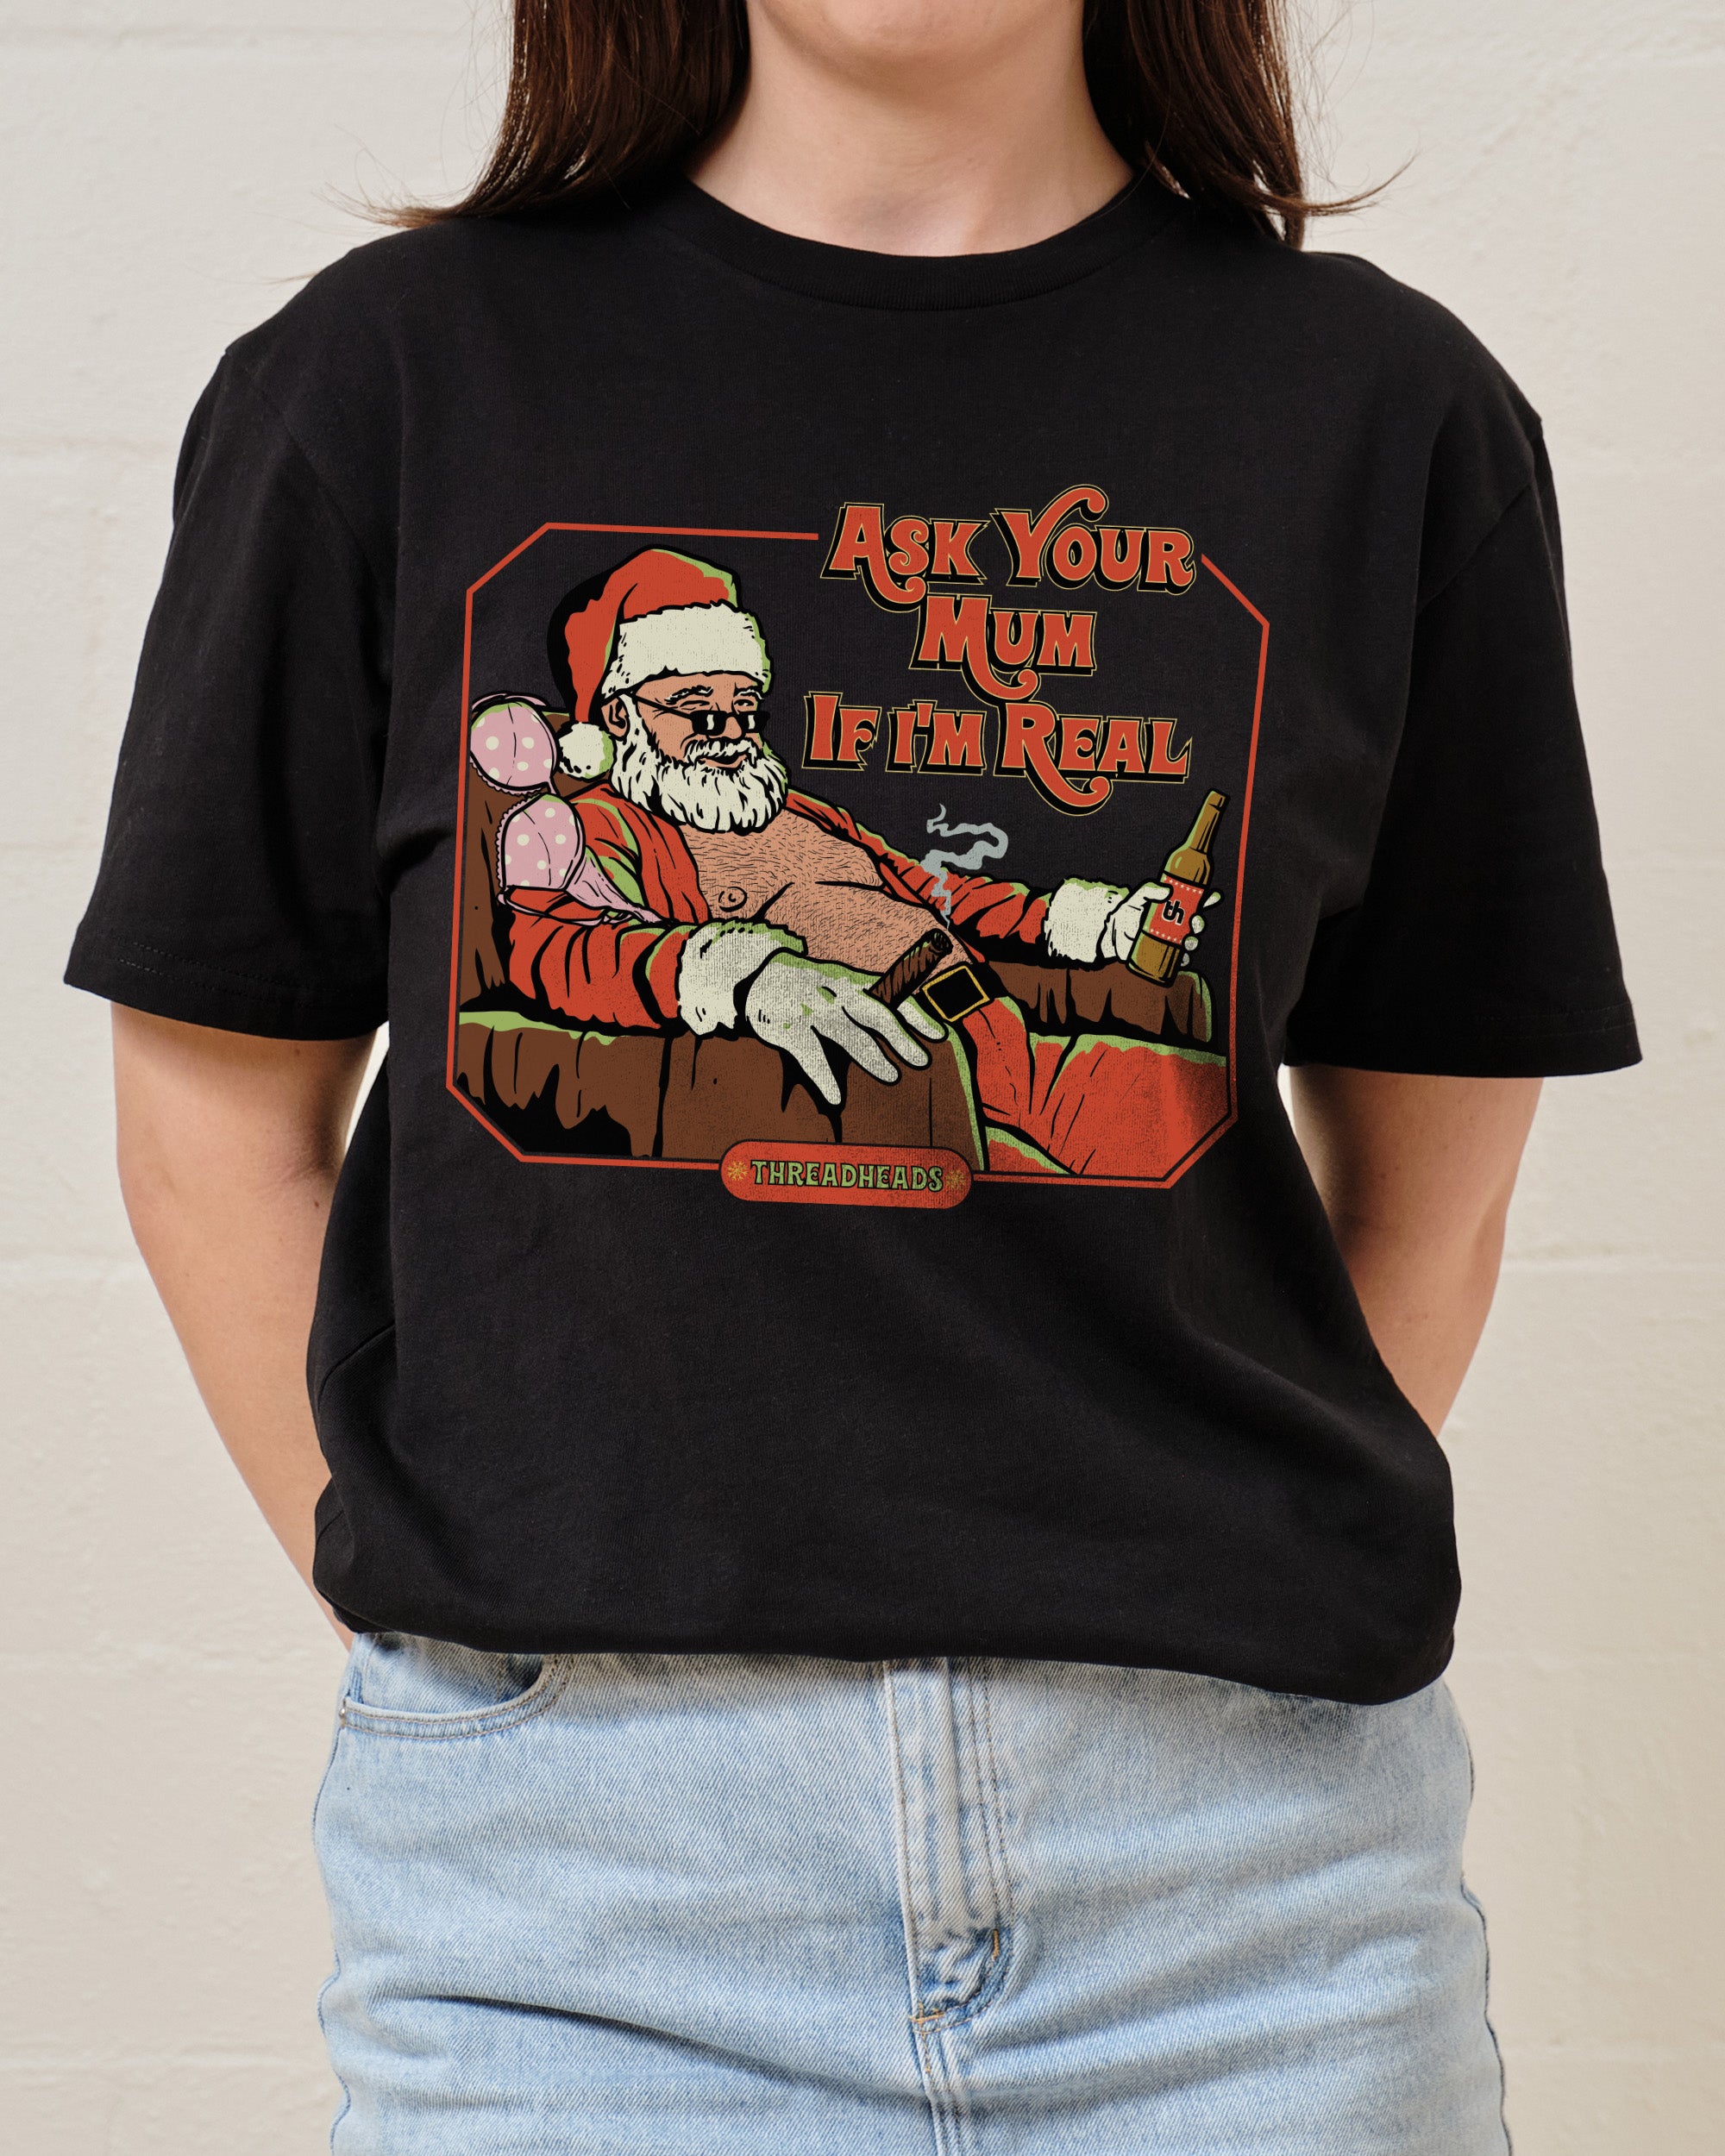 Ask Your Mum If I'm Real T-Shirt